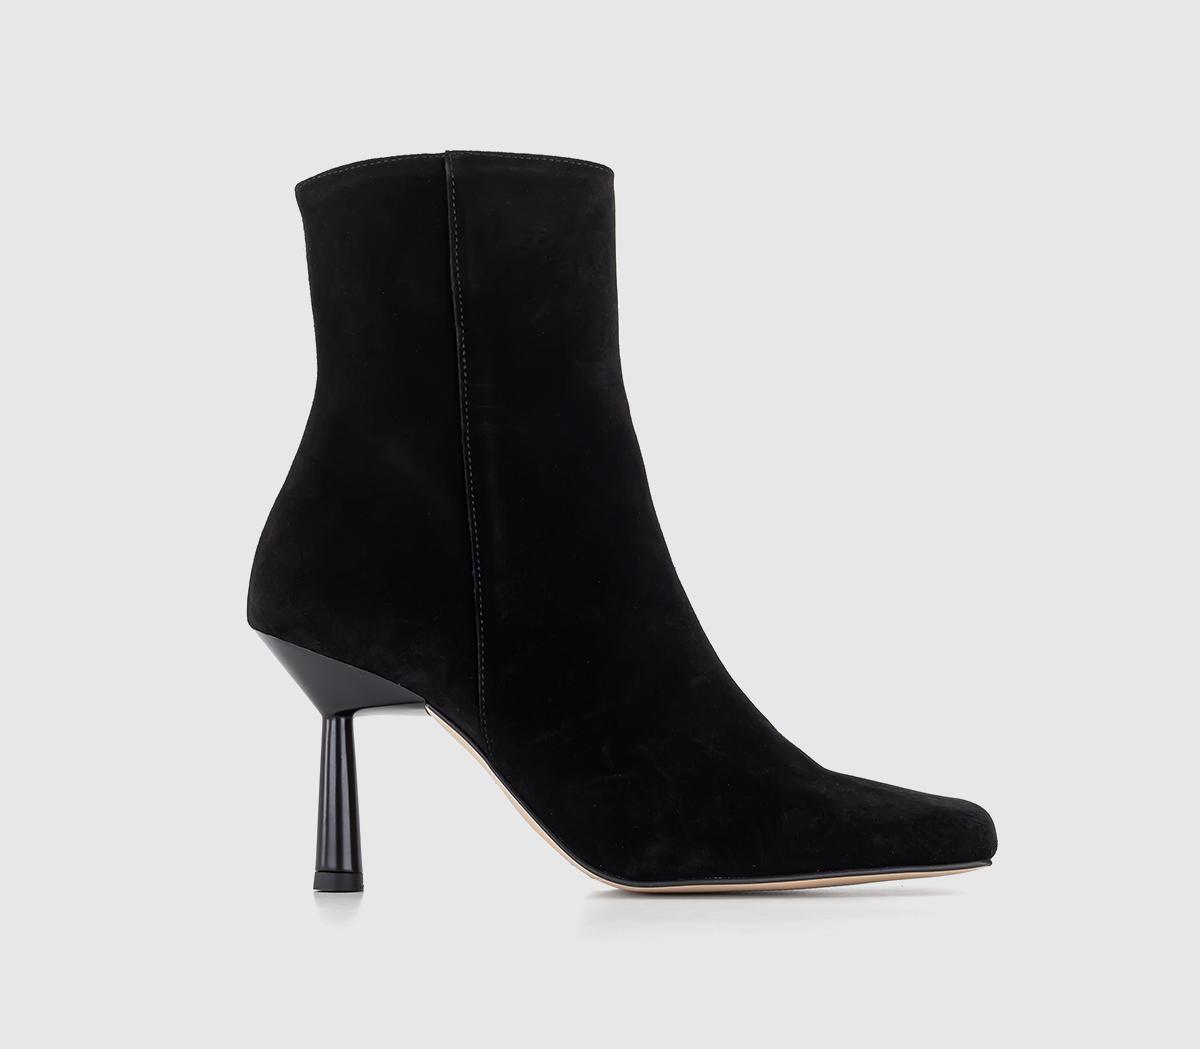 ALOHAS Frappe Stileto Heeled Ankle Boots Black - Women's Ankle Boots